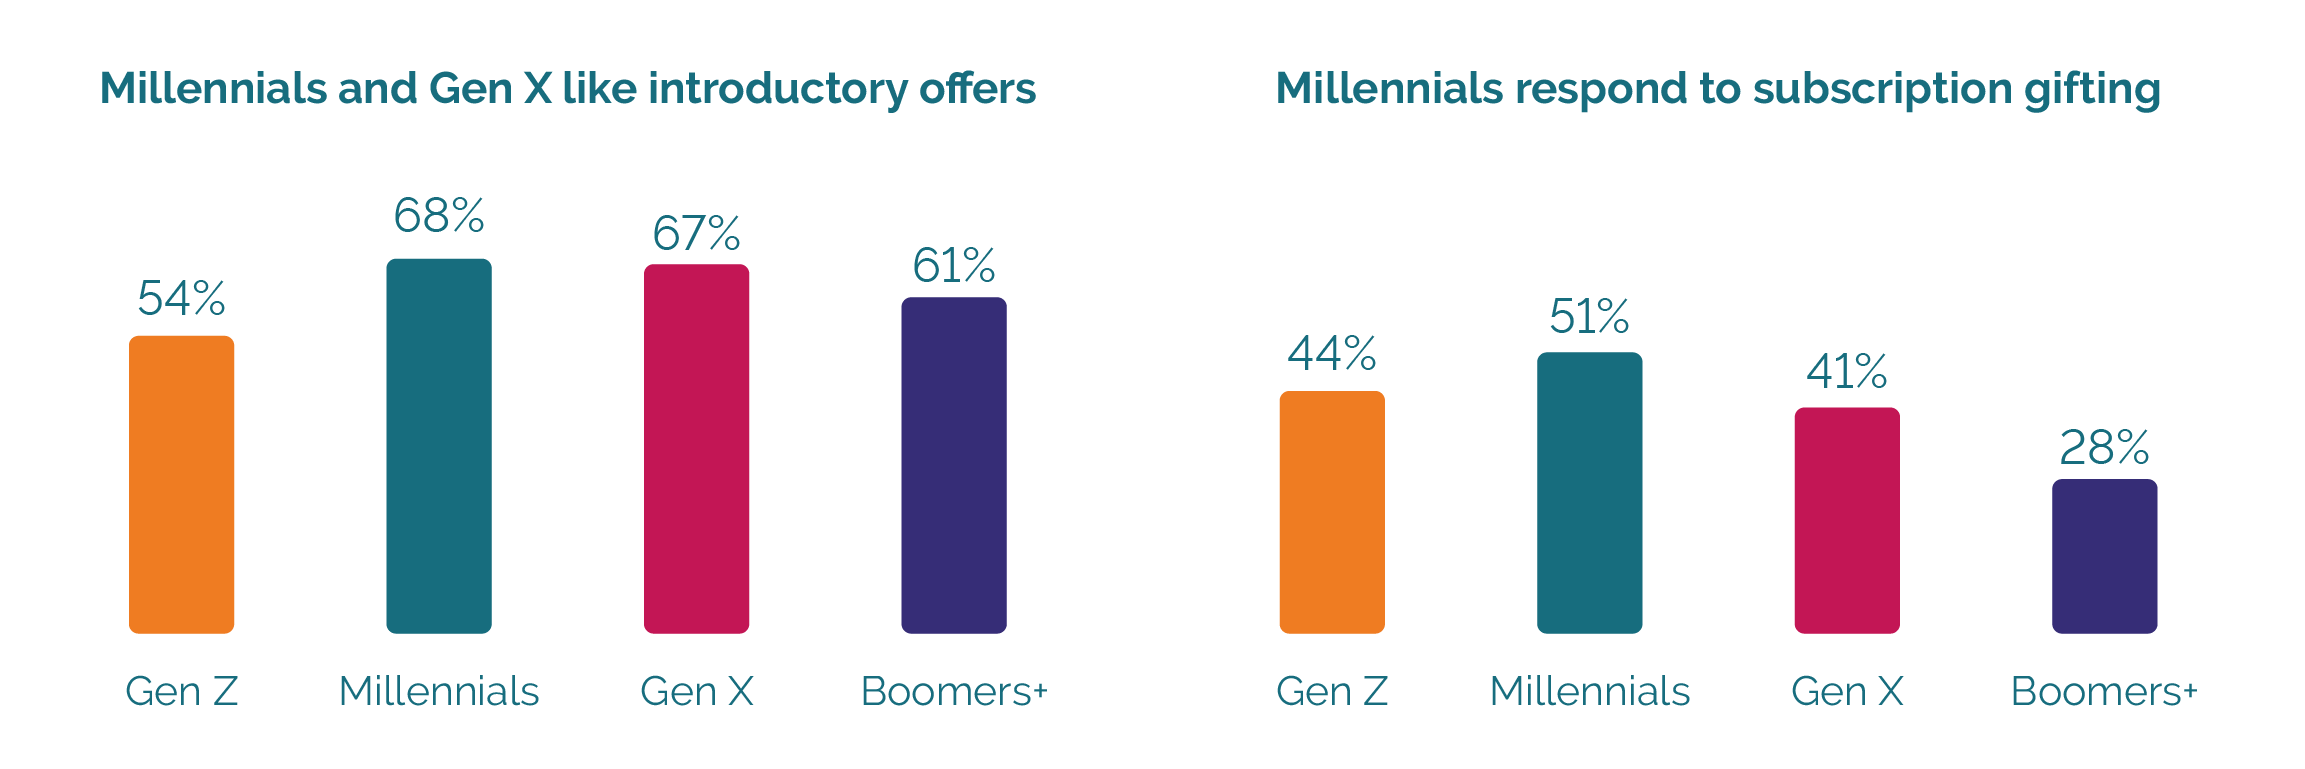 Millennials respond to introductory offers and gifting